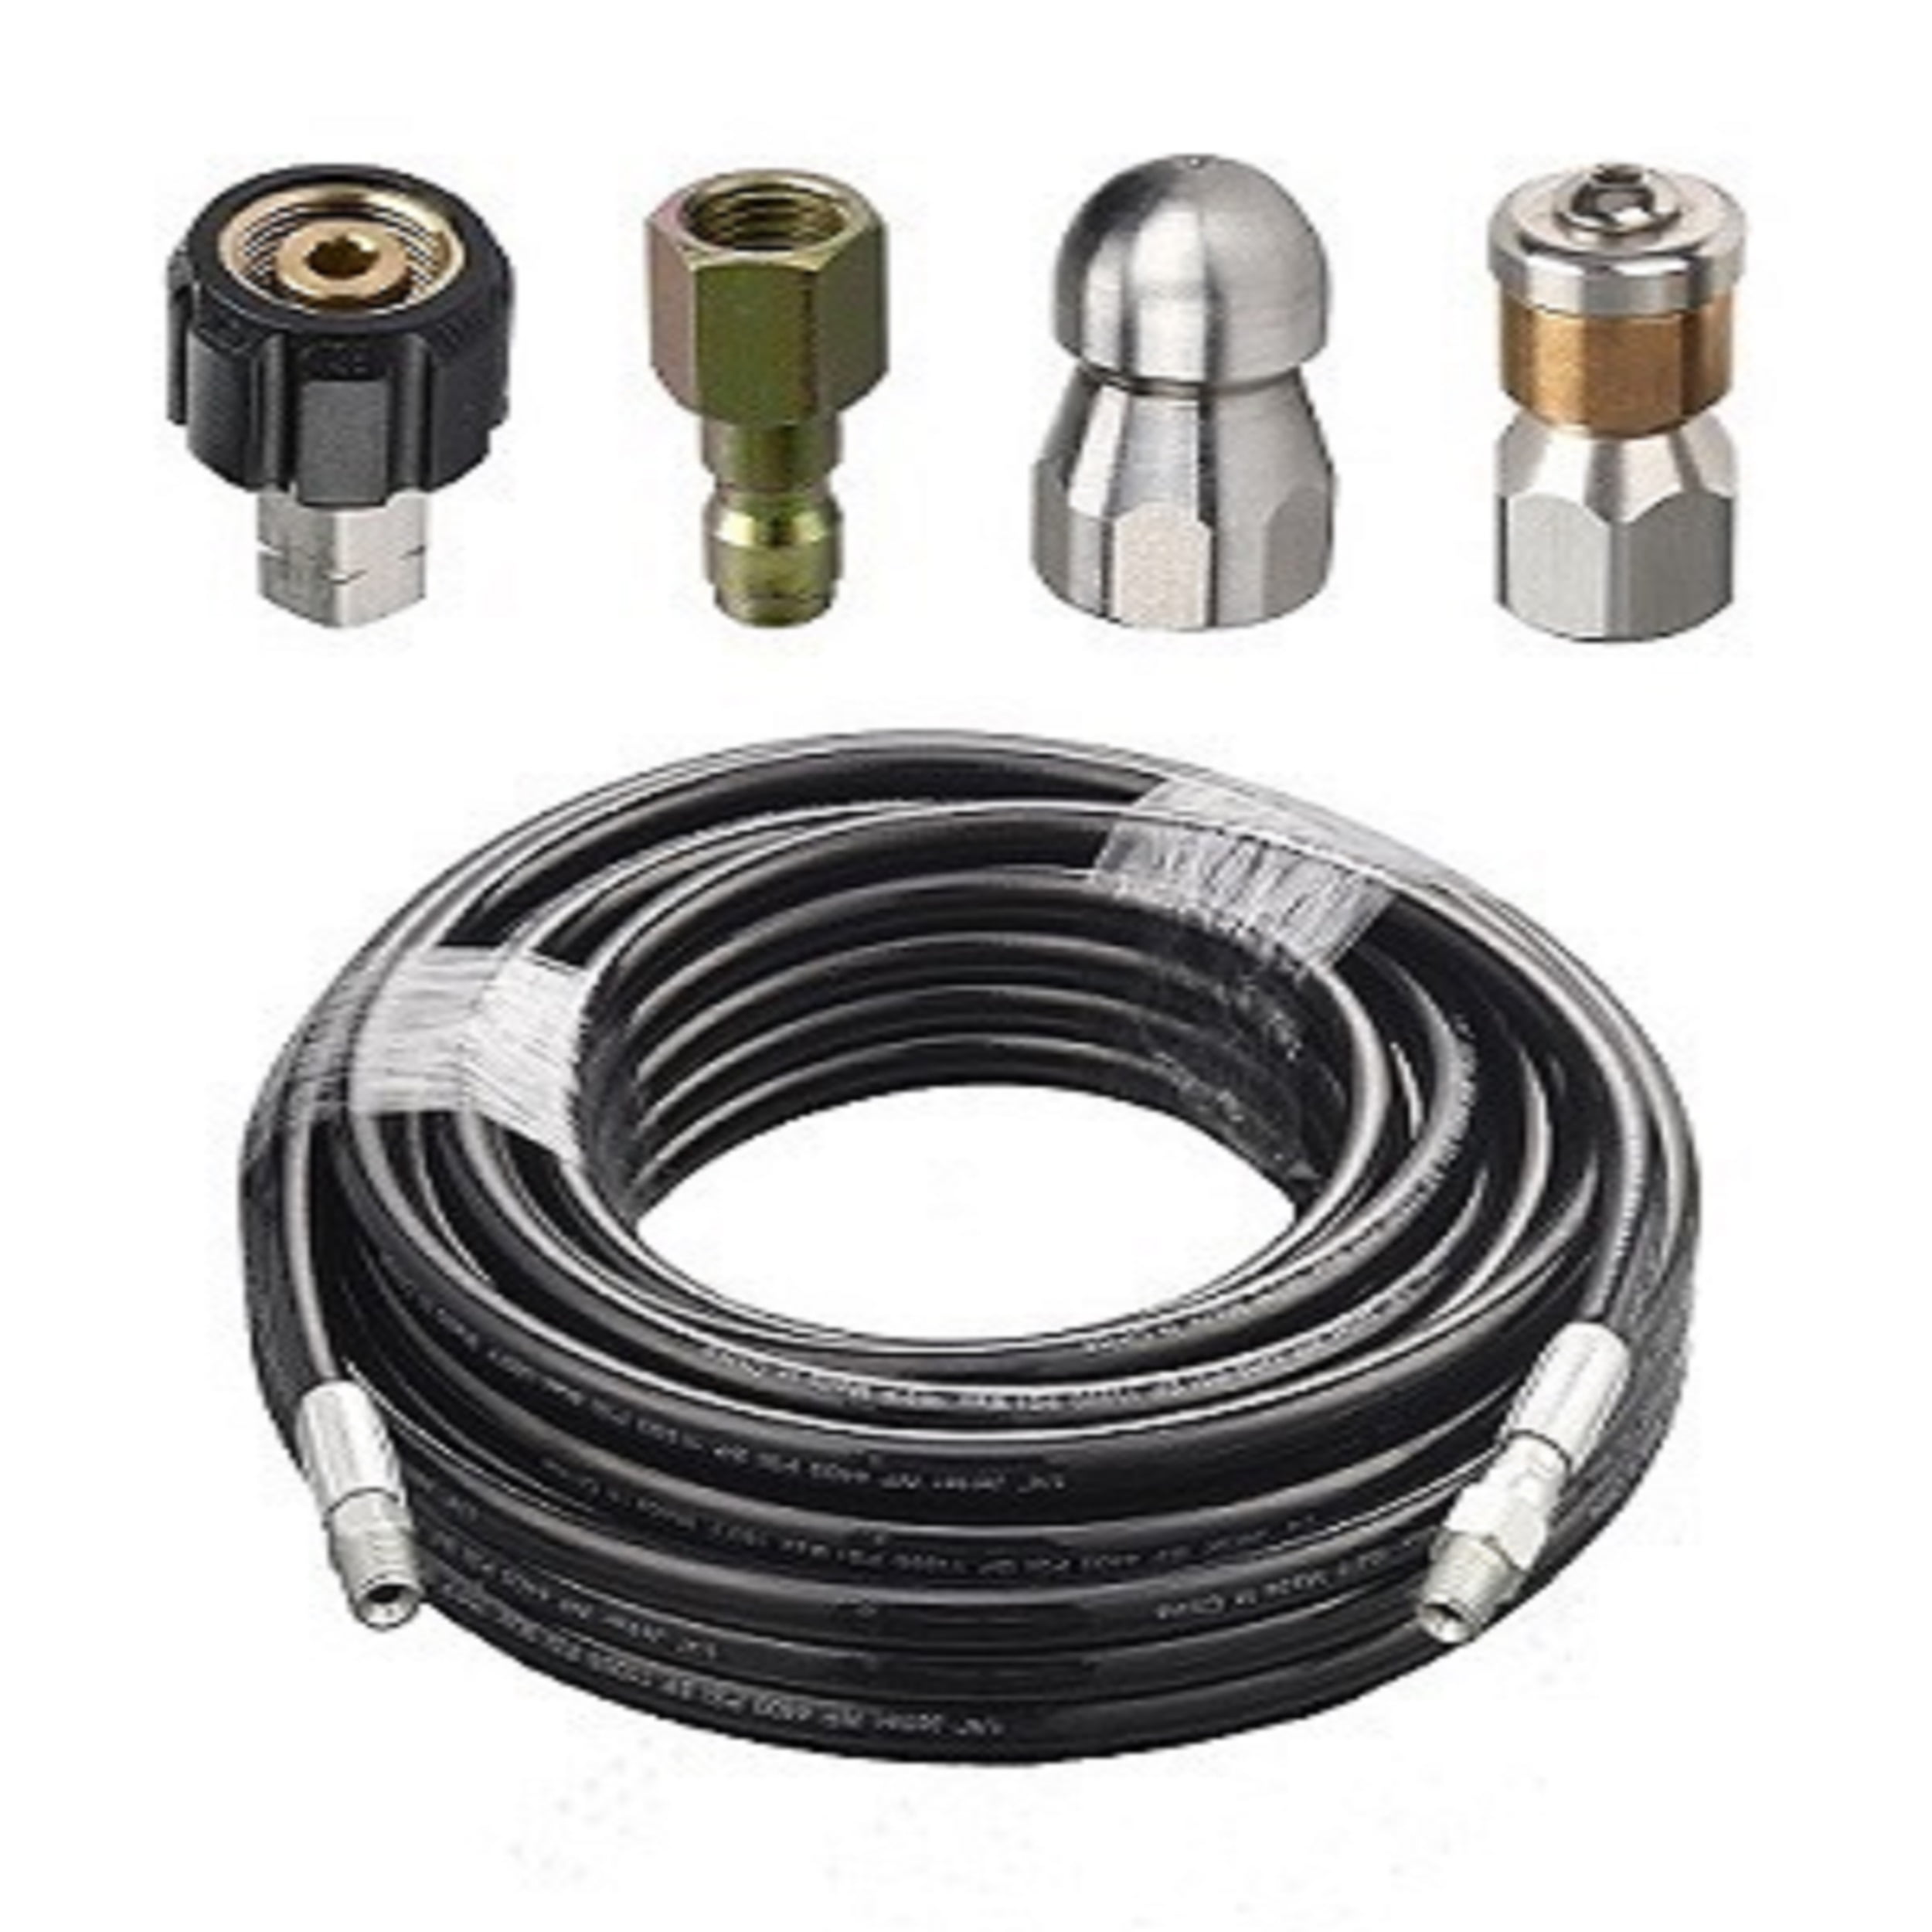 RIDGE WASHER Sewer Jetter Kit for Pressure Washer 4.5 Drain Jetting 50 Feet Hose Laser and Rotating Sewer Nozzle 1/4 Inch 4000 PSI Orifice 4.0 